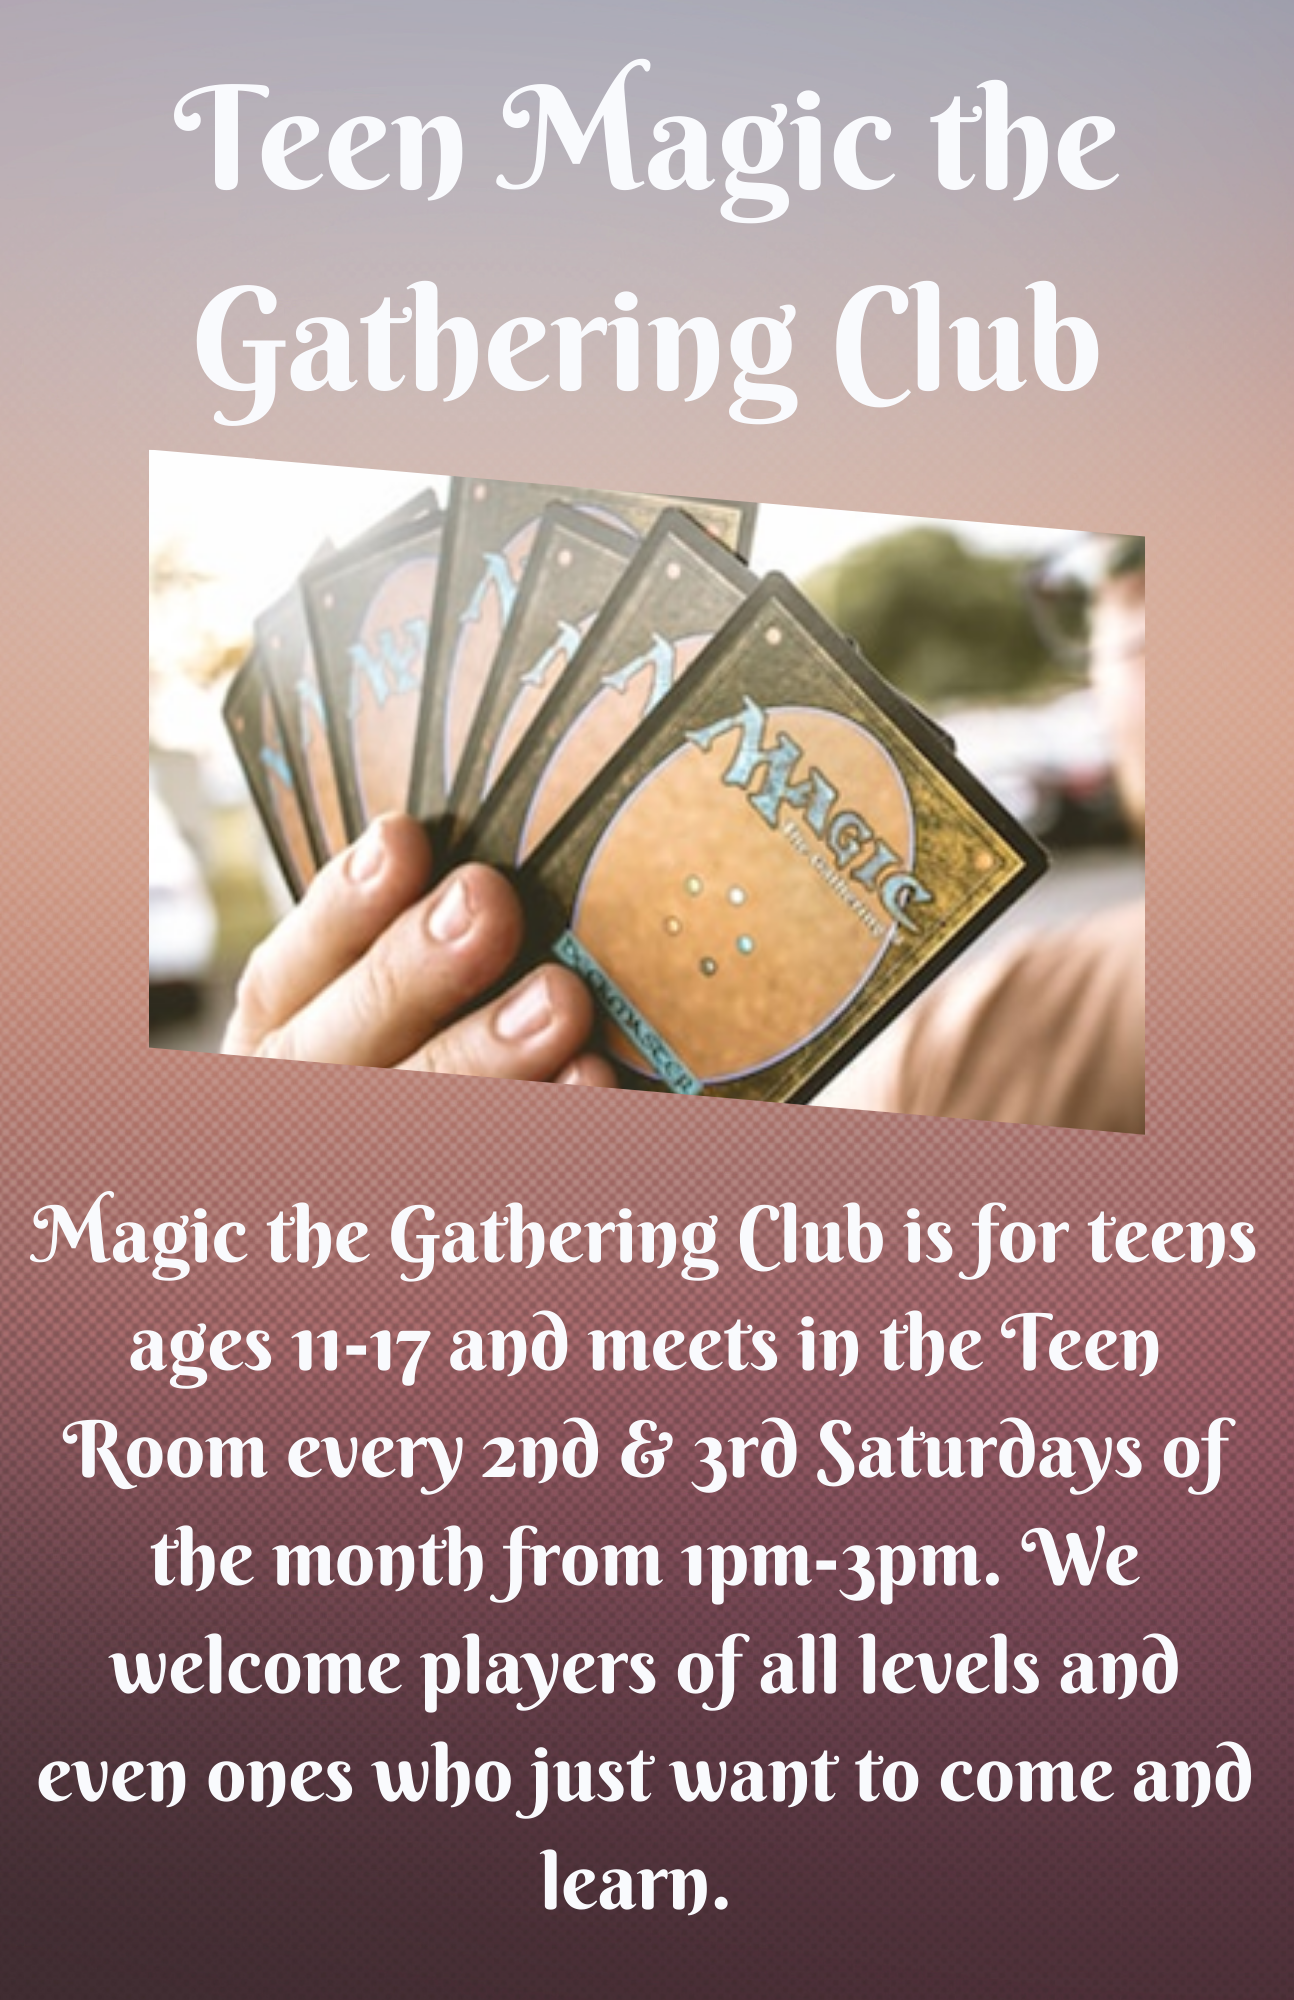 Dark Background with Teen Magic the Gathering Club in white letters. Image of Magic cards being held by a hand. 